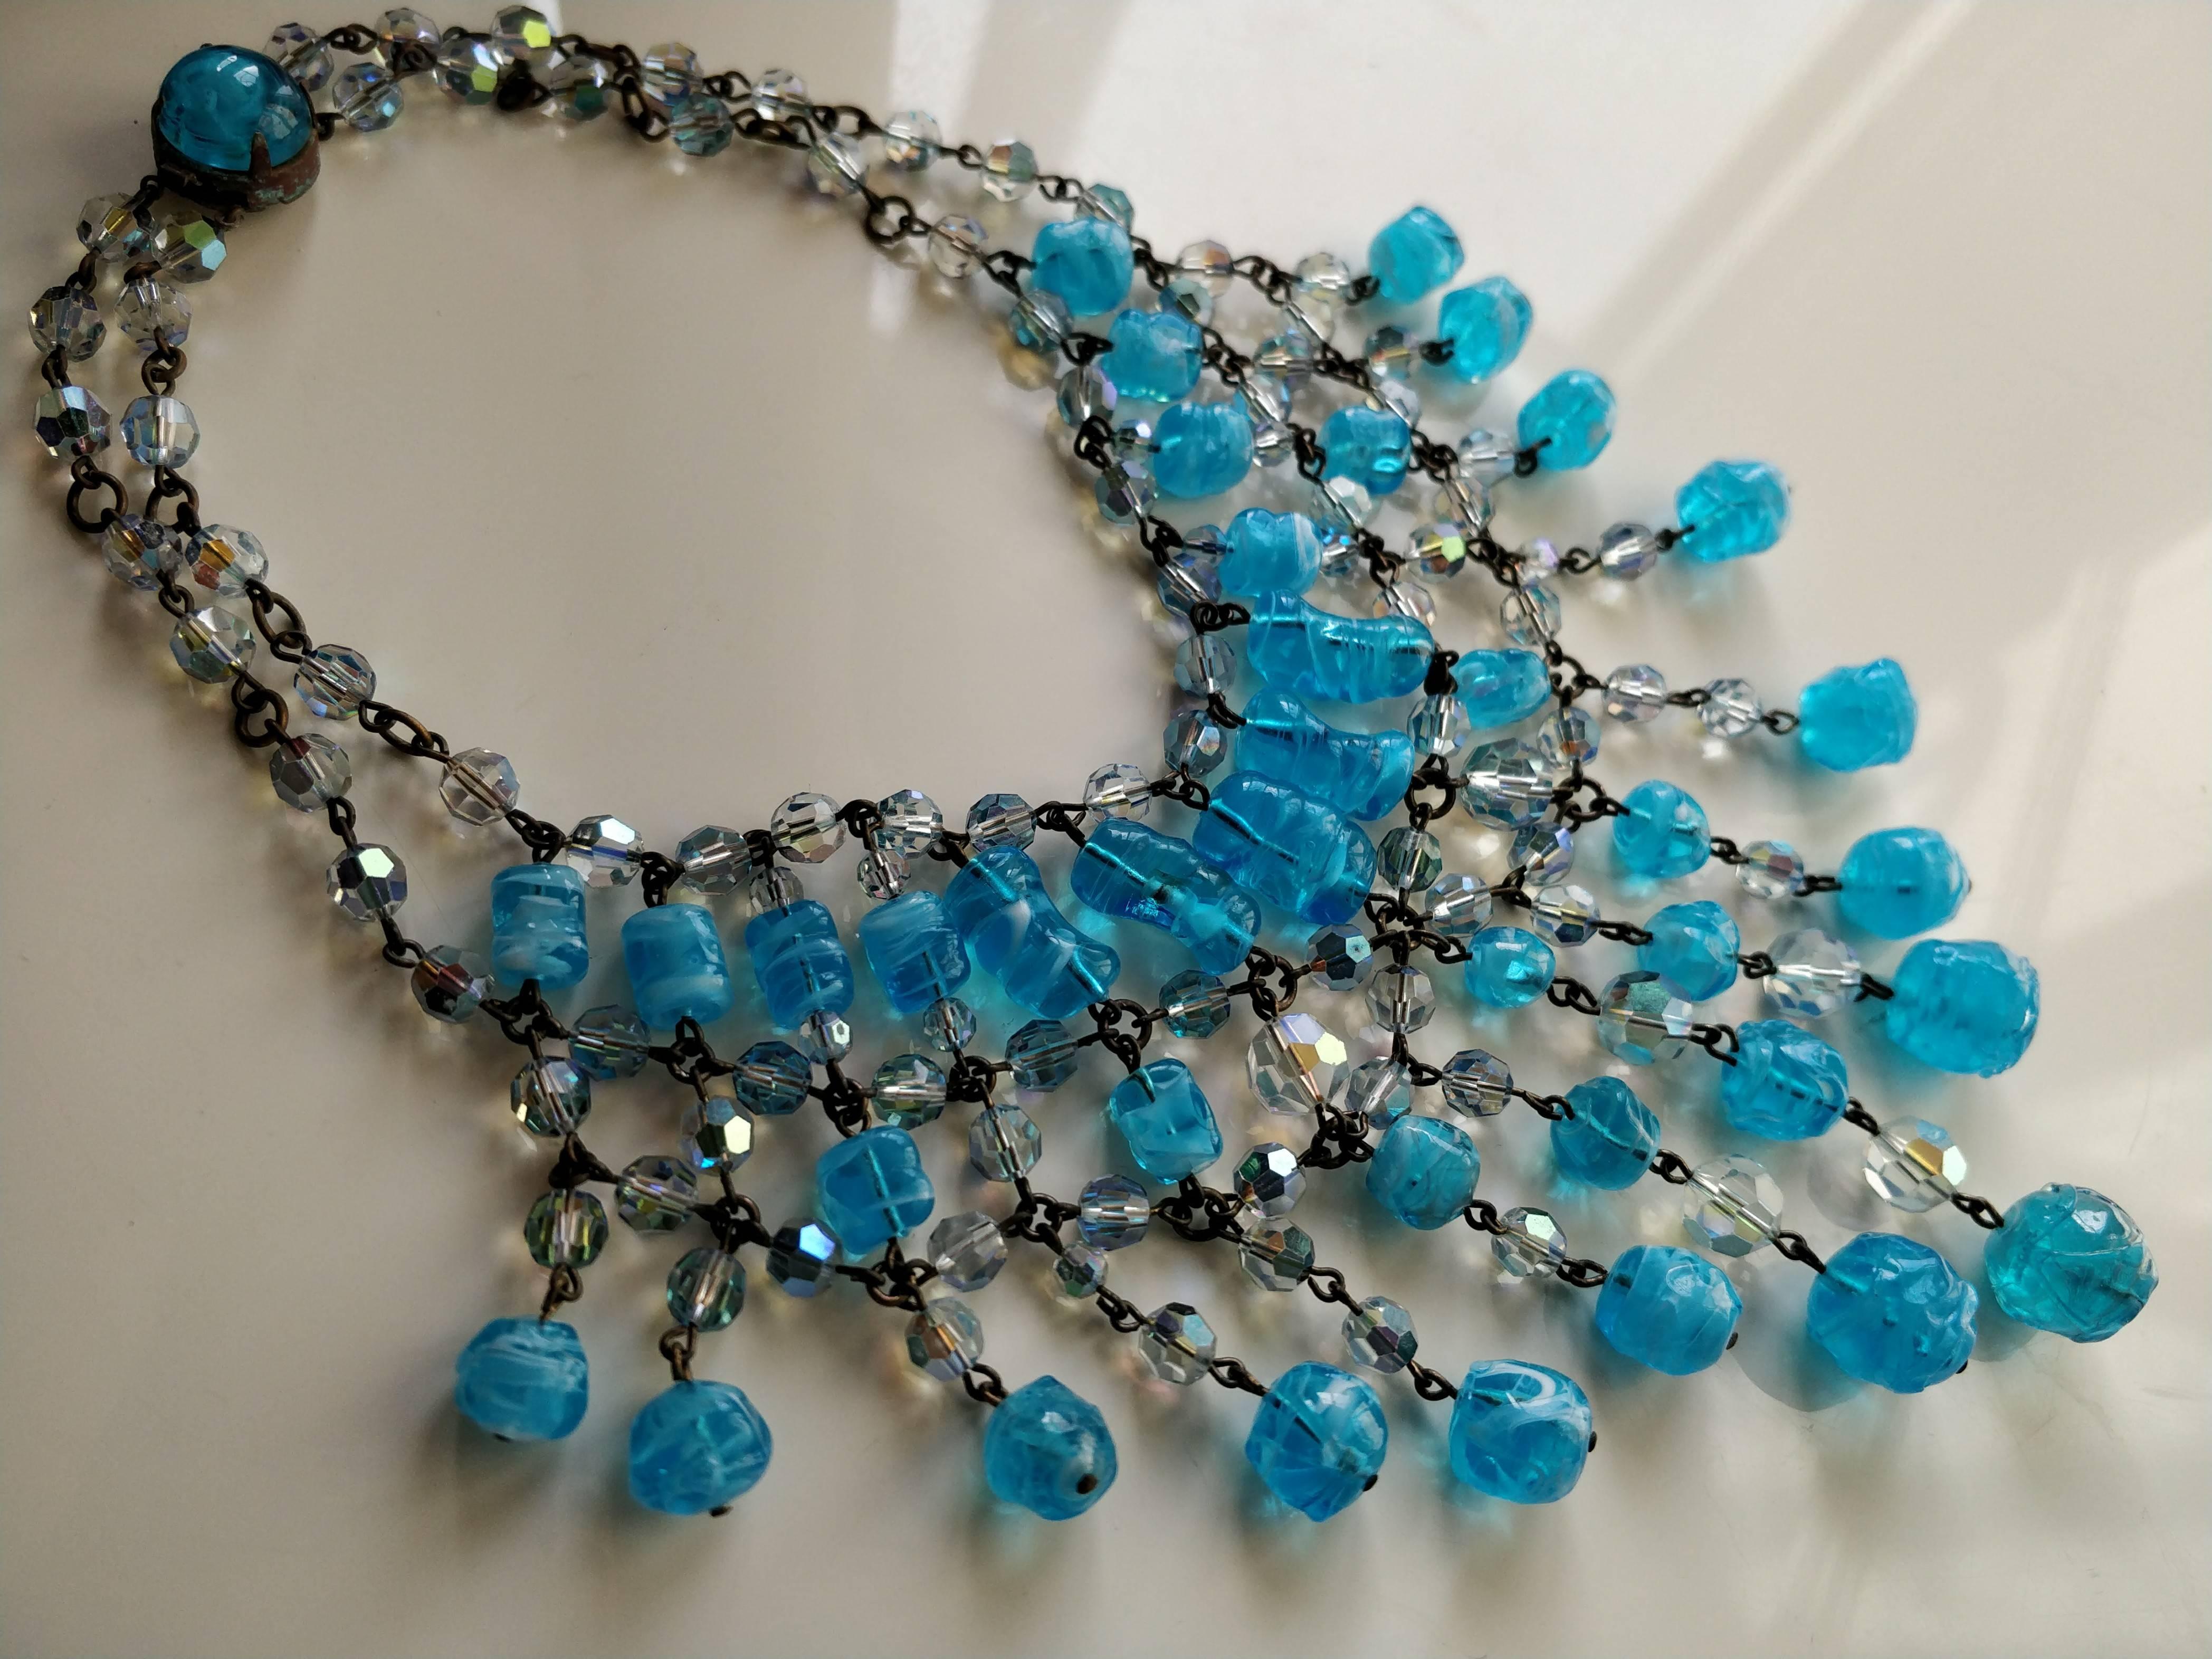 1960s Aqua color poured glass bead and crystal waterfall bib choker necklace. Neck length is 15 inches. Individually linked throughout with a double strand closure. Poured glass clasp. Drop is 4.5 inches. 